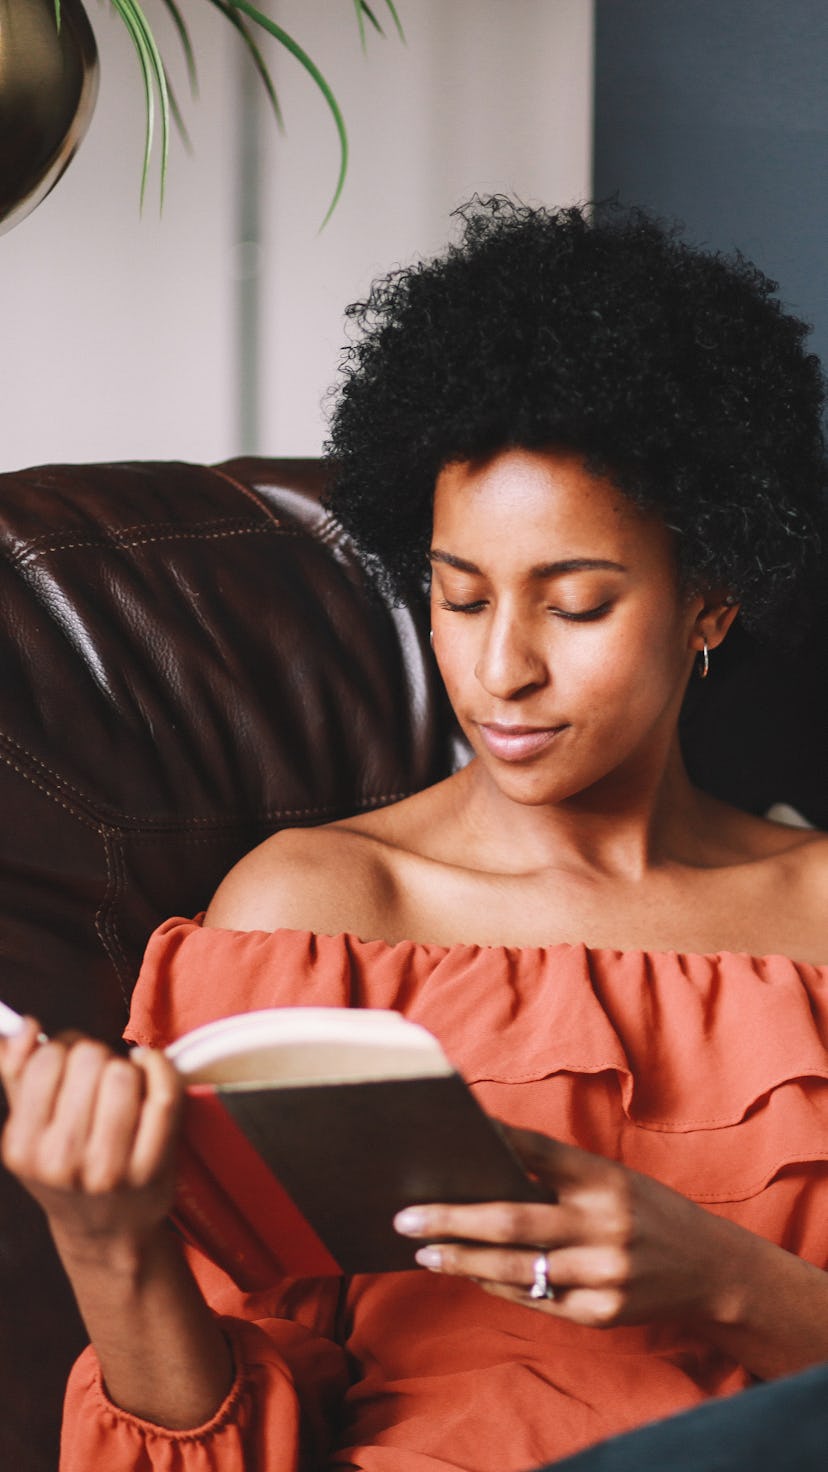 Young woman relaxing, reading a book.